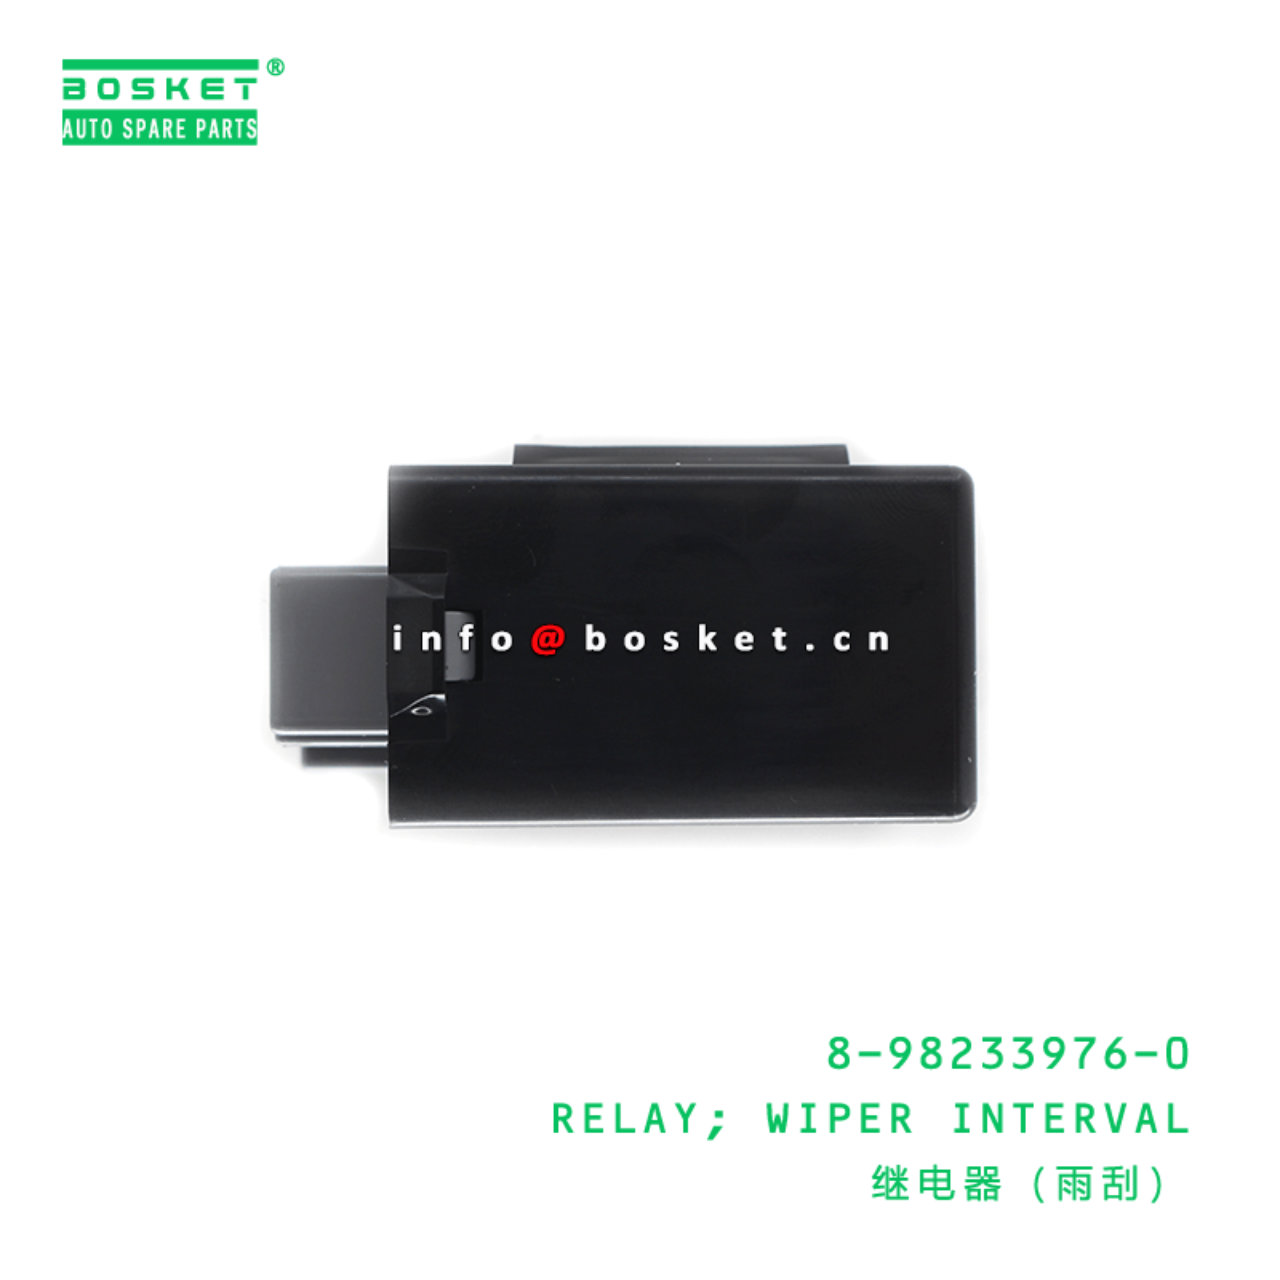 8-98233976-0 Wiper Interval Relay 8982339760 Suitable for ISUZU 700P VC46 4HK1 